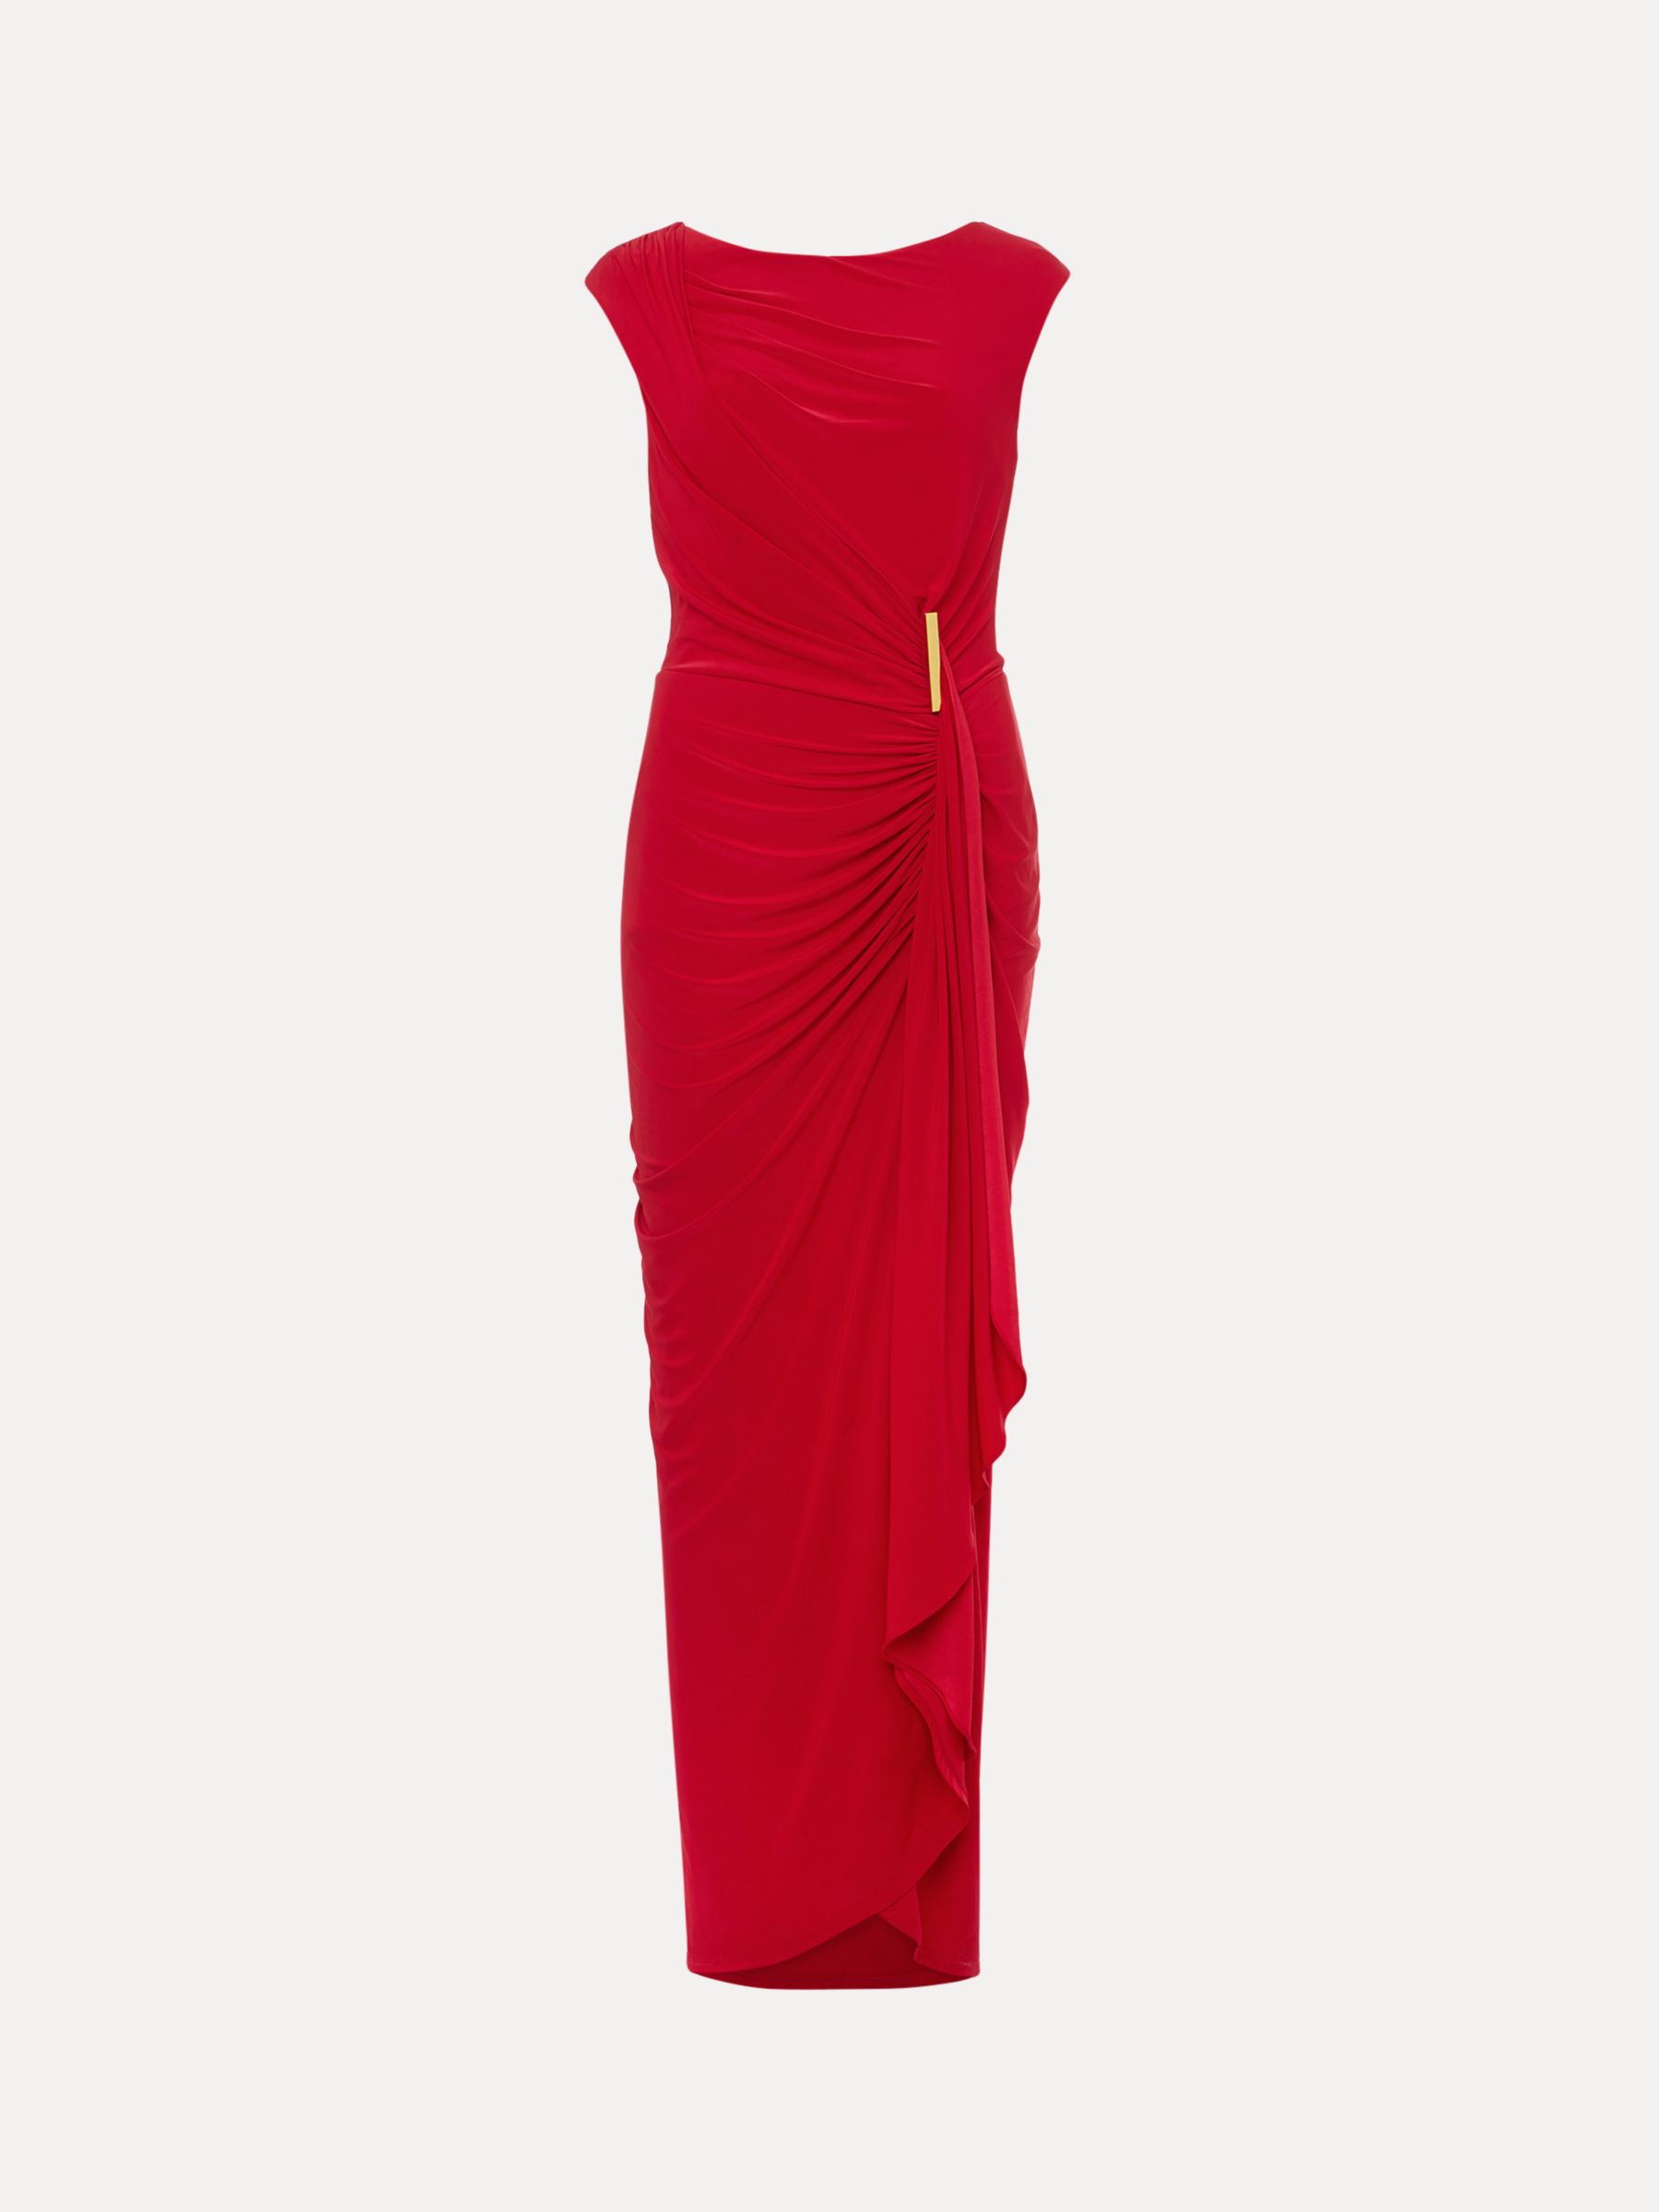 Phase Eight Donna Ruched Maxi Dress, Scarlet, 6